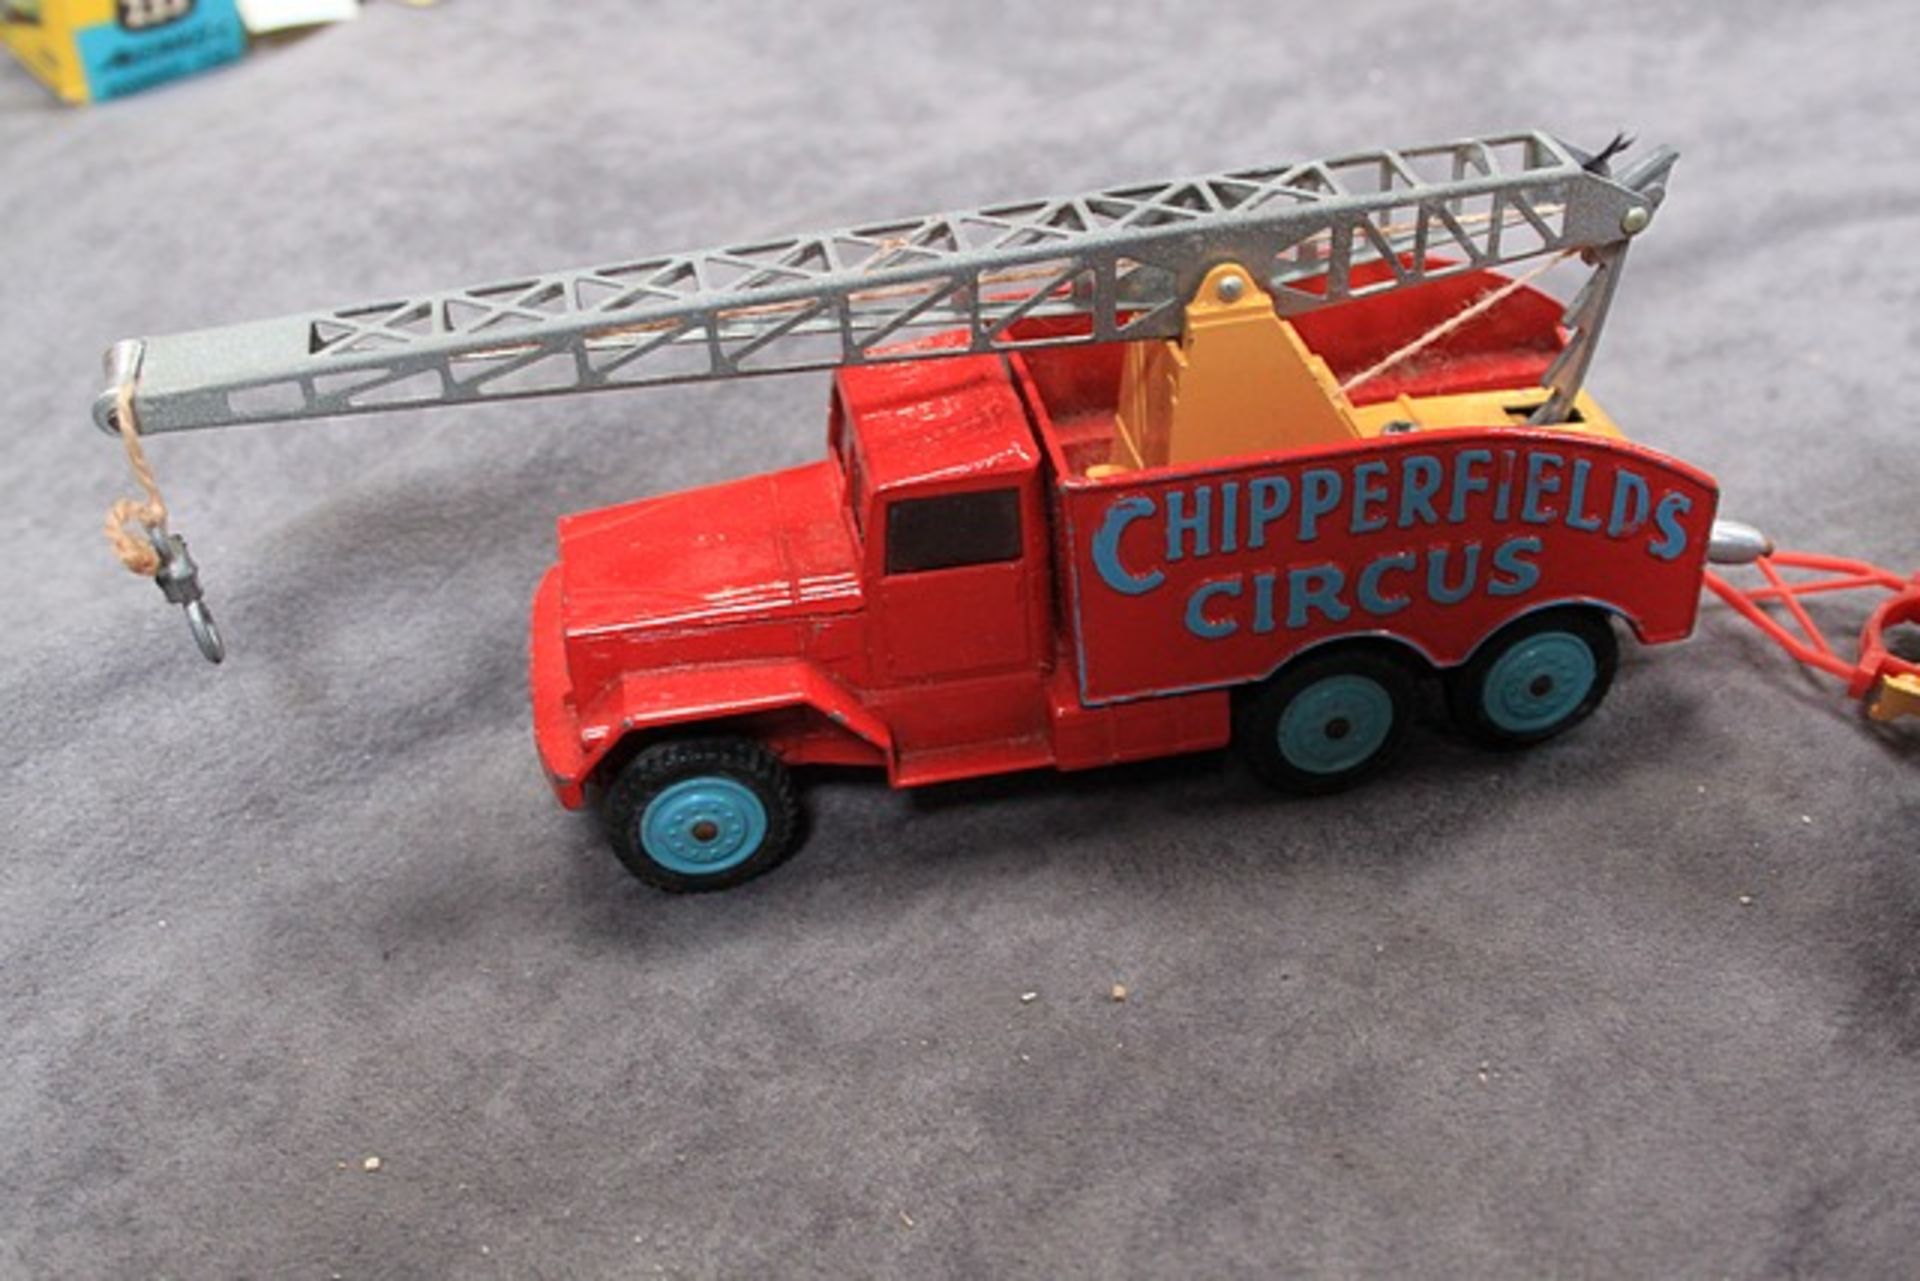 Corgi Toys Diecast Gift Set #23 Chipperfields Circus Set Models Range From Mint To Near Mint - Image 7 of 9